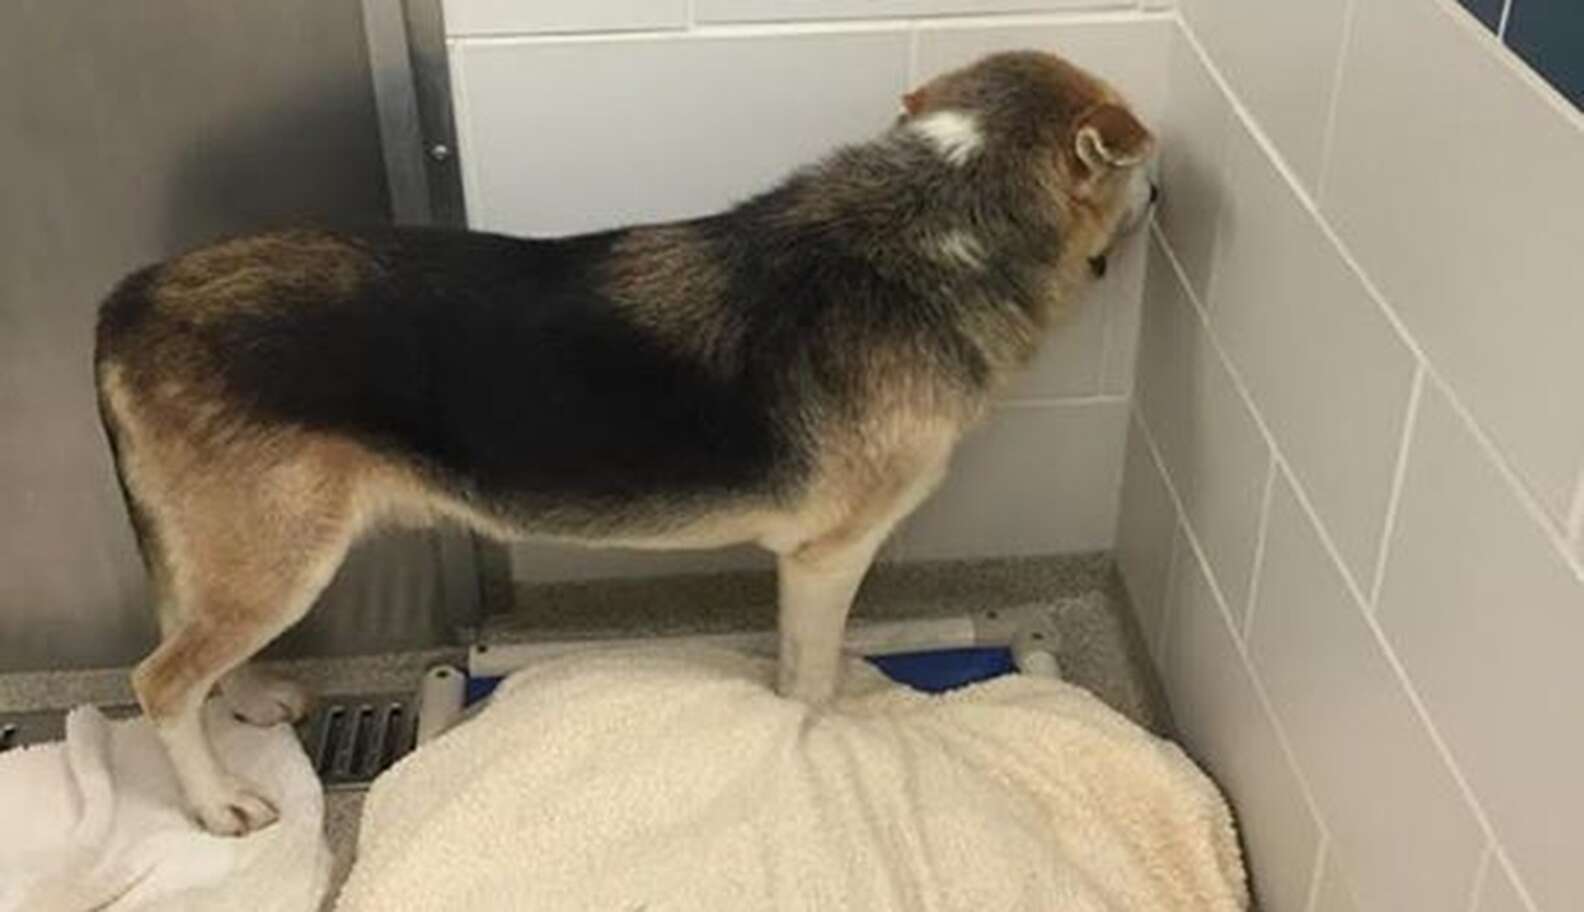 Dog So Scared In Shelter He Won't Even Show His Face - The Dodo